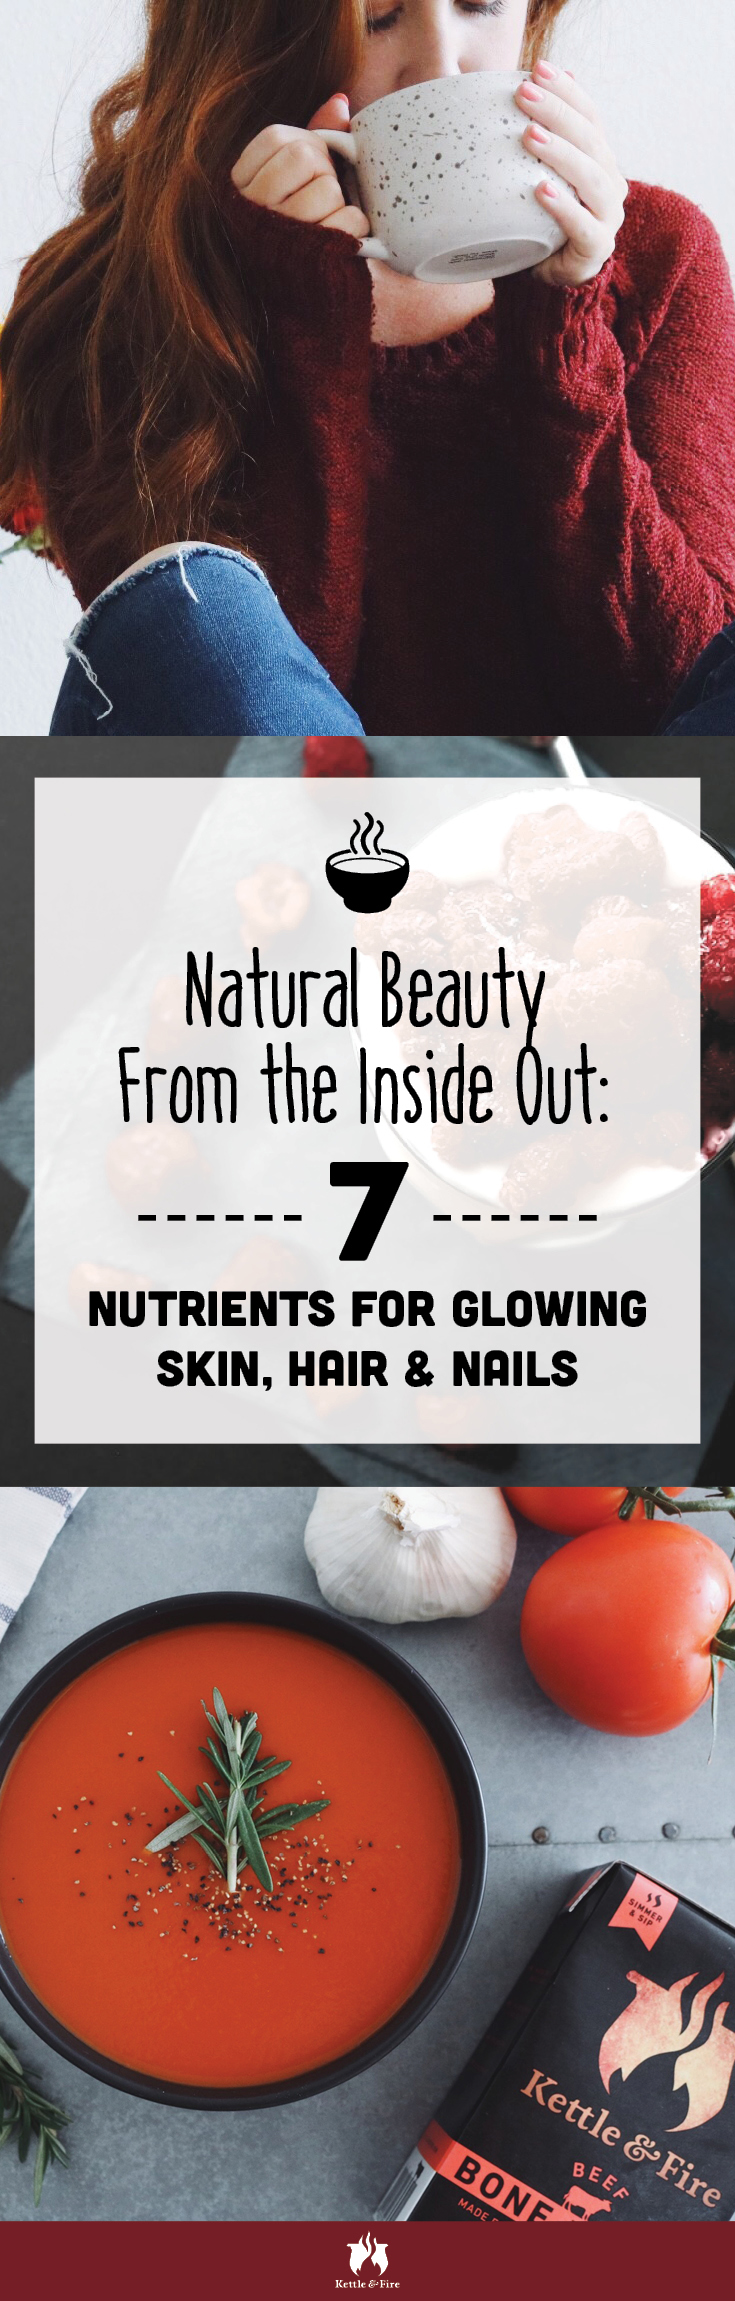 Since healthy hair and nails all begin at the cellular level, outer radiance and natural beauty is the result of putting the right nutrients into your body.